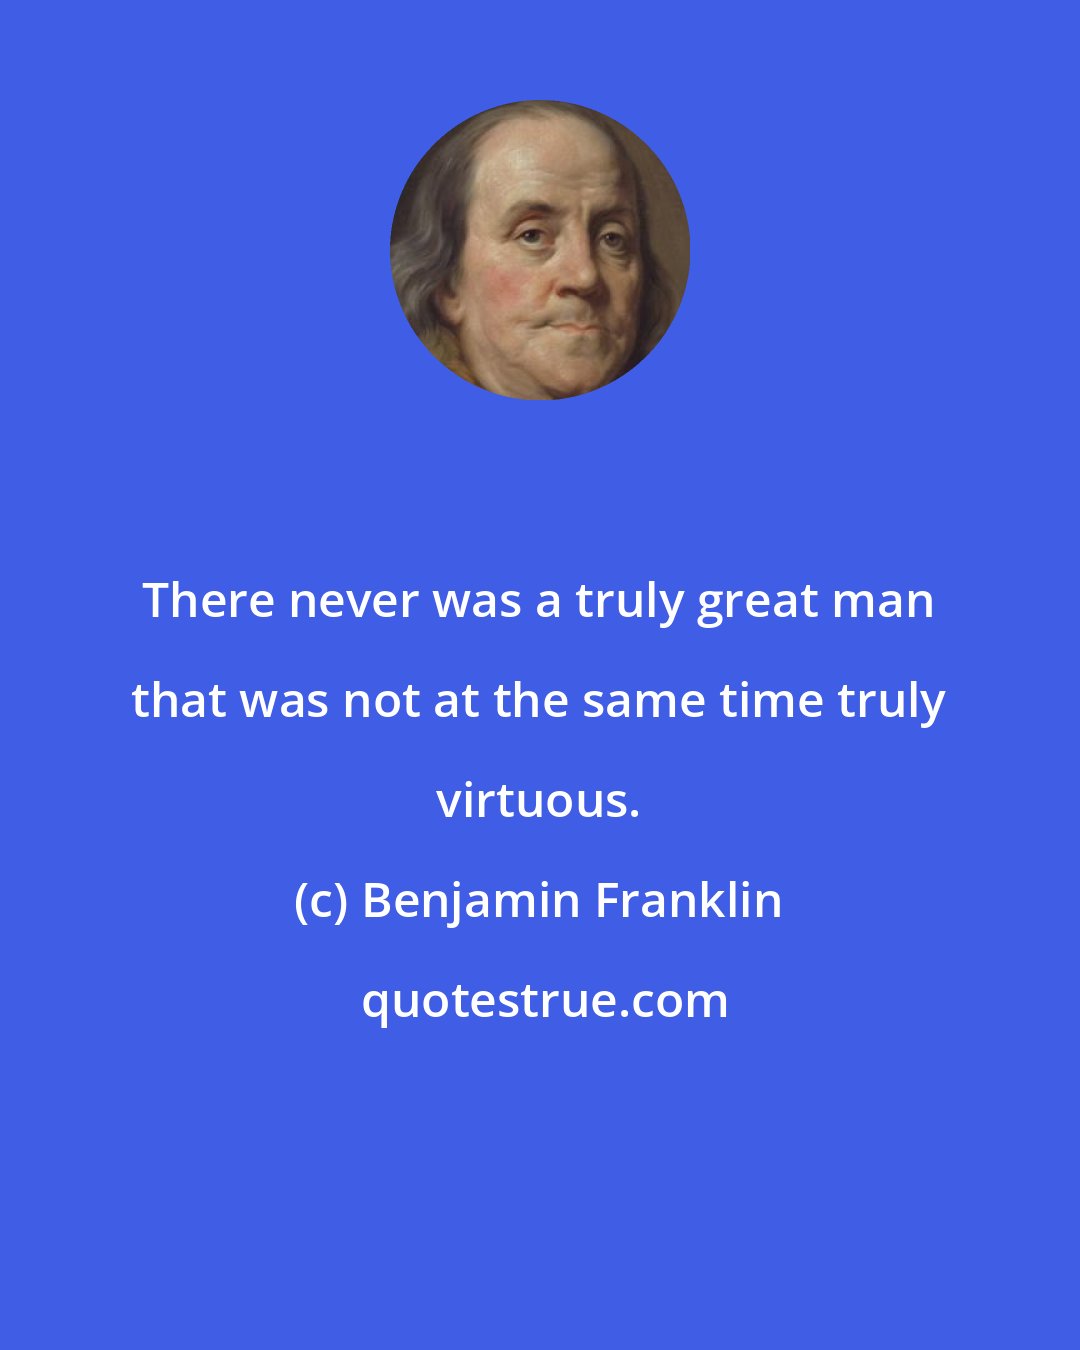 Benjamin Franklin: There never was a truly great man that was not at the same time truly virtuous.